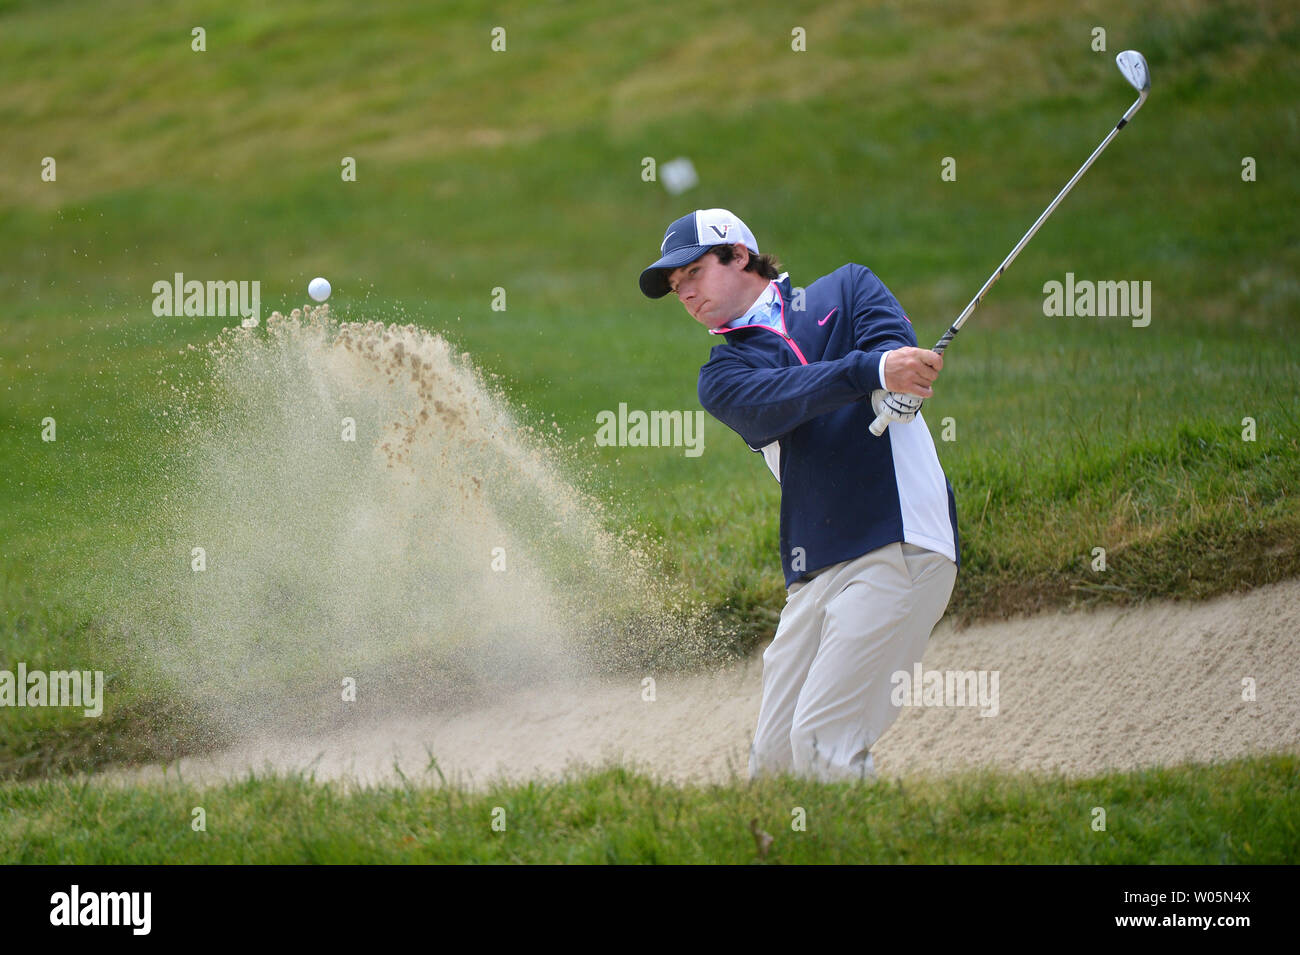 Hunter Hamrick hits out of a bunker on the 16th fairway during his practice round prior to the start of the 112th U.S. Open Championship at the Olympic Club in San Francisco, California on June 13, 2012.  UPI/Kevin Dietsch Stock Photo